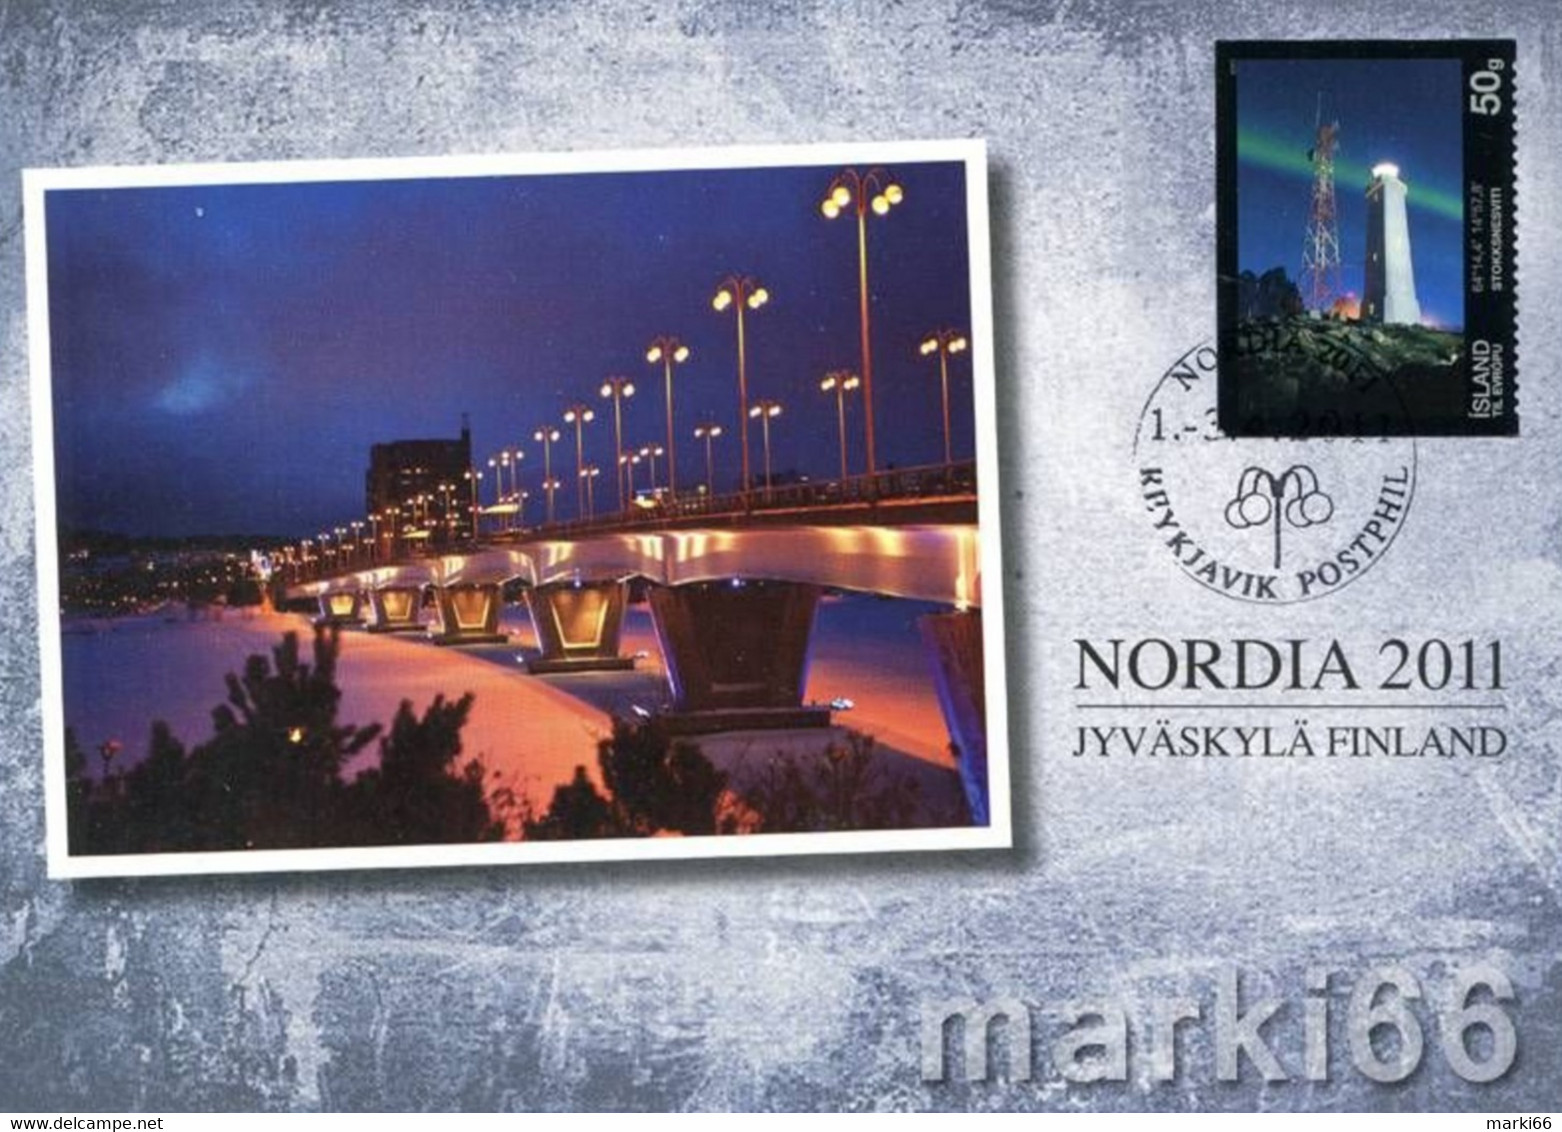 Iceland - 2011 - Exhibition Card - NORDIA 2011, Finland - Official Postcard With Stamp And Special Postmark - Tarjetas – Máxima